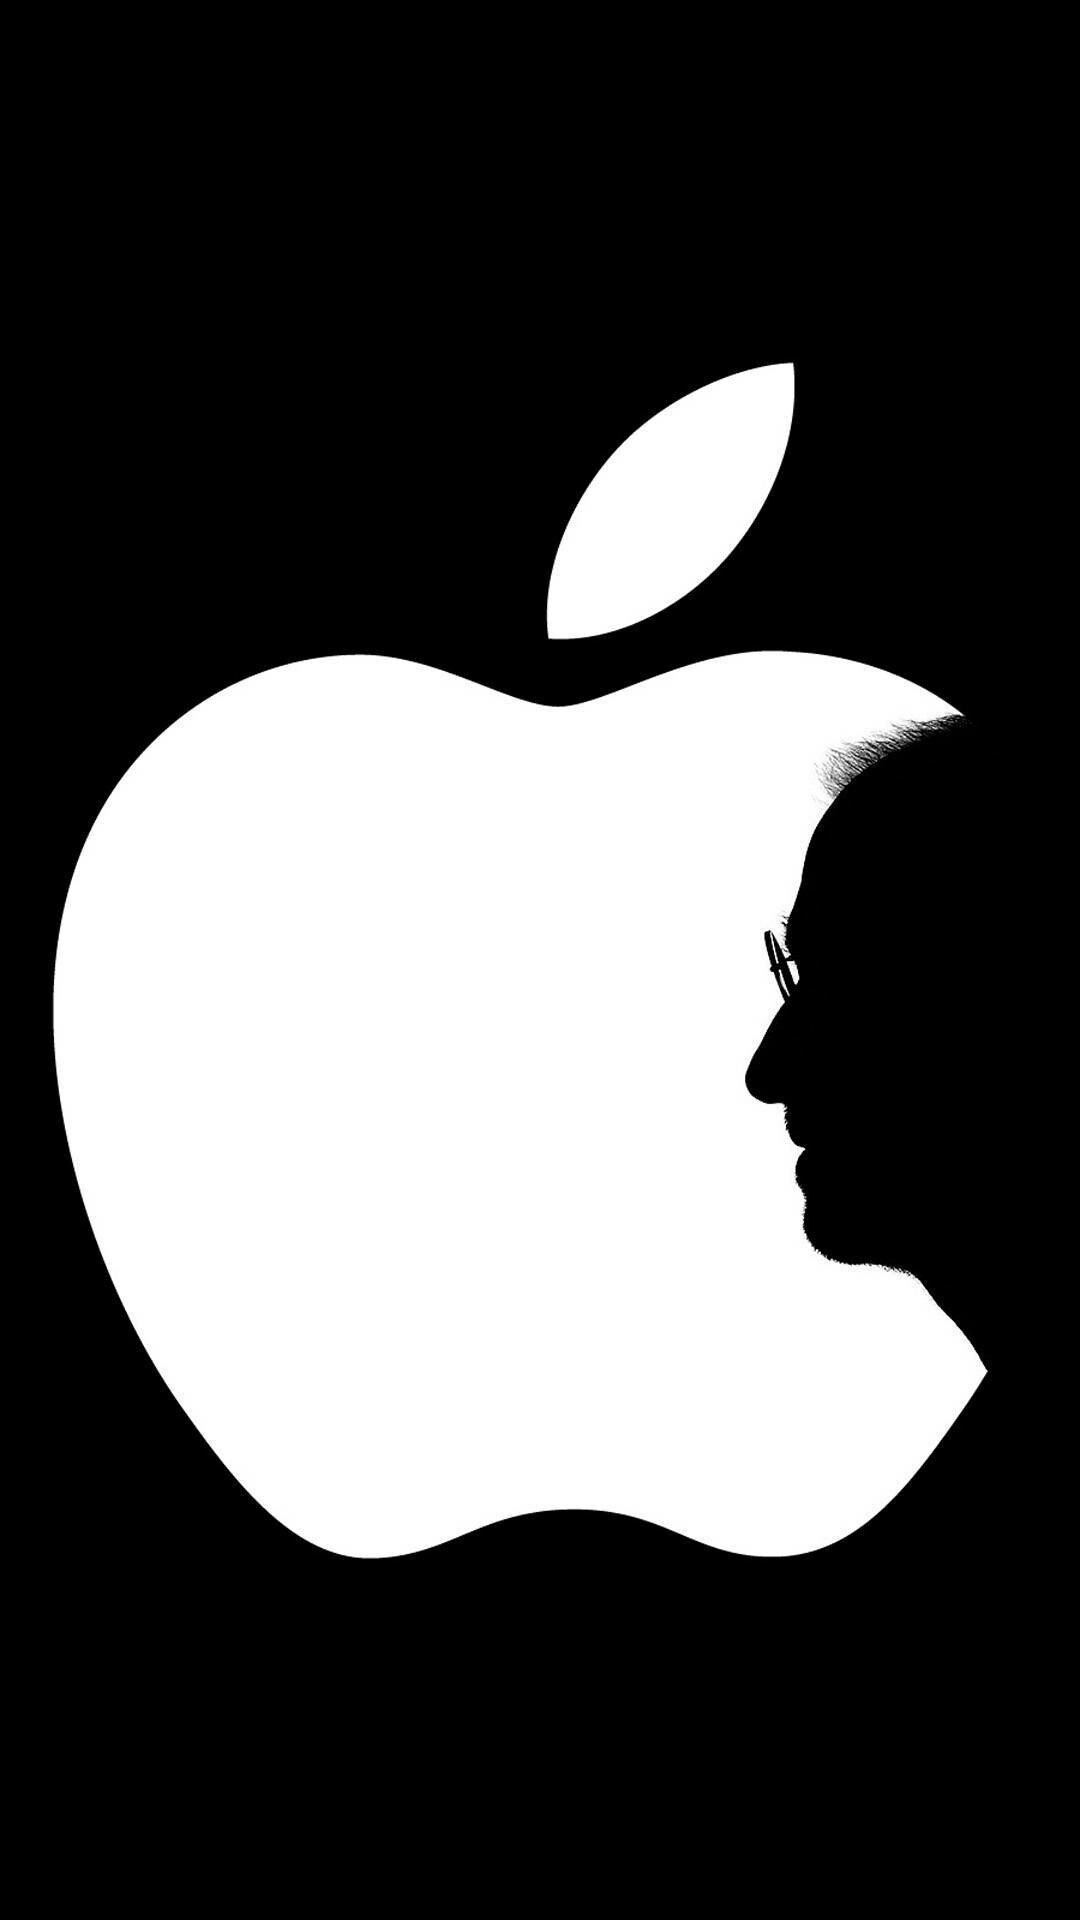 Steve Jobs: Apple, Inc. engages in the design, manufacture, and sale of smartphones, personal computers, tablets. 1080x1920 Full HD Background.